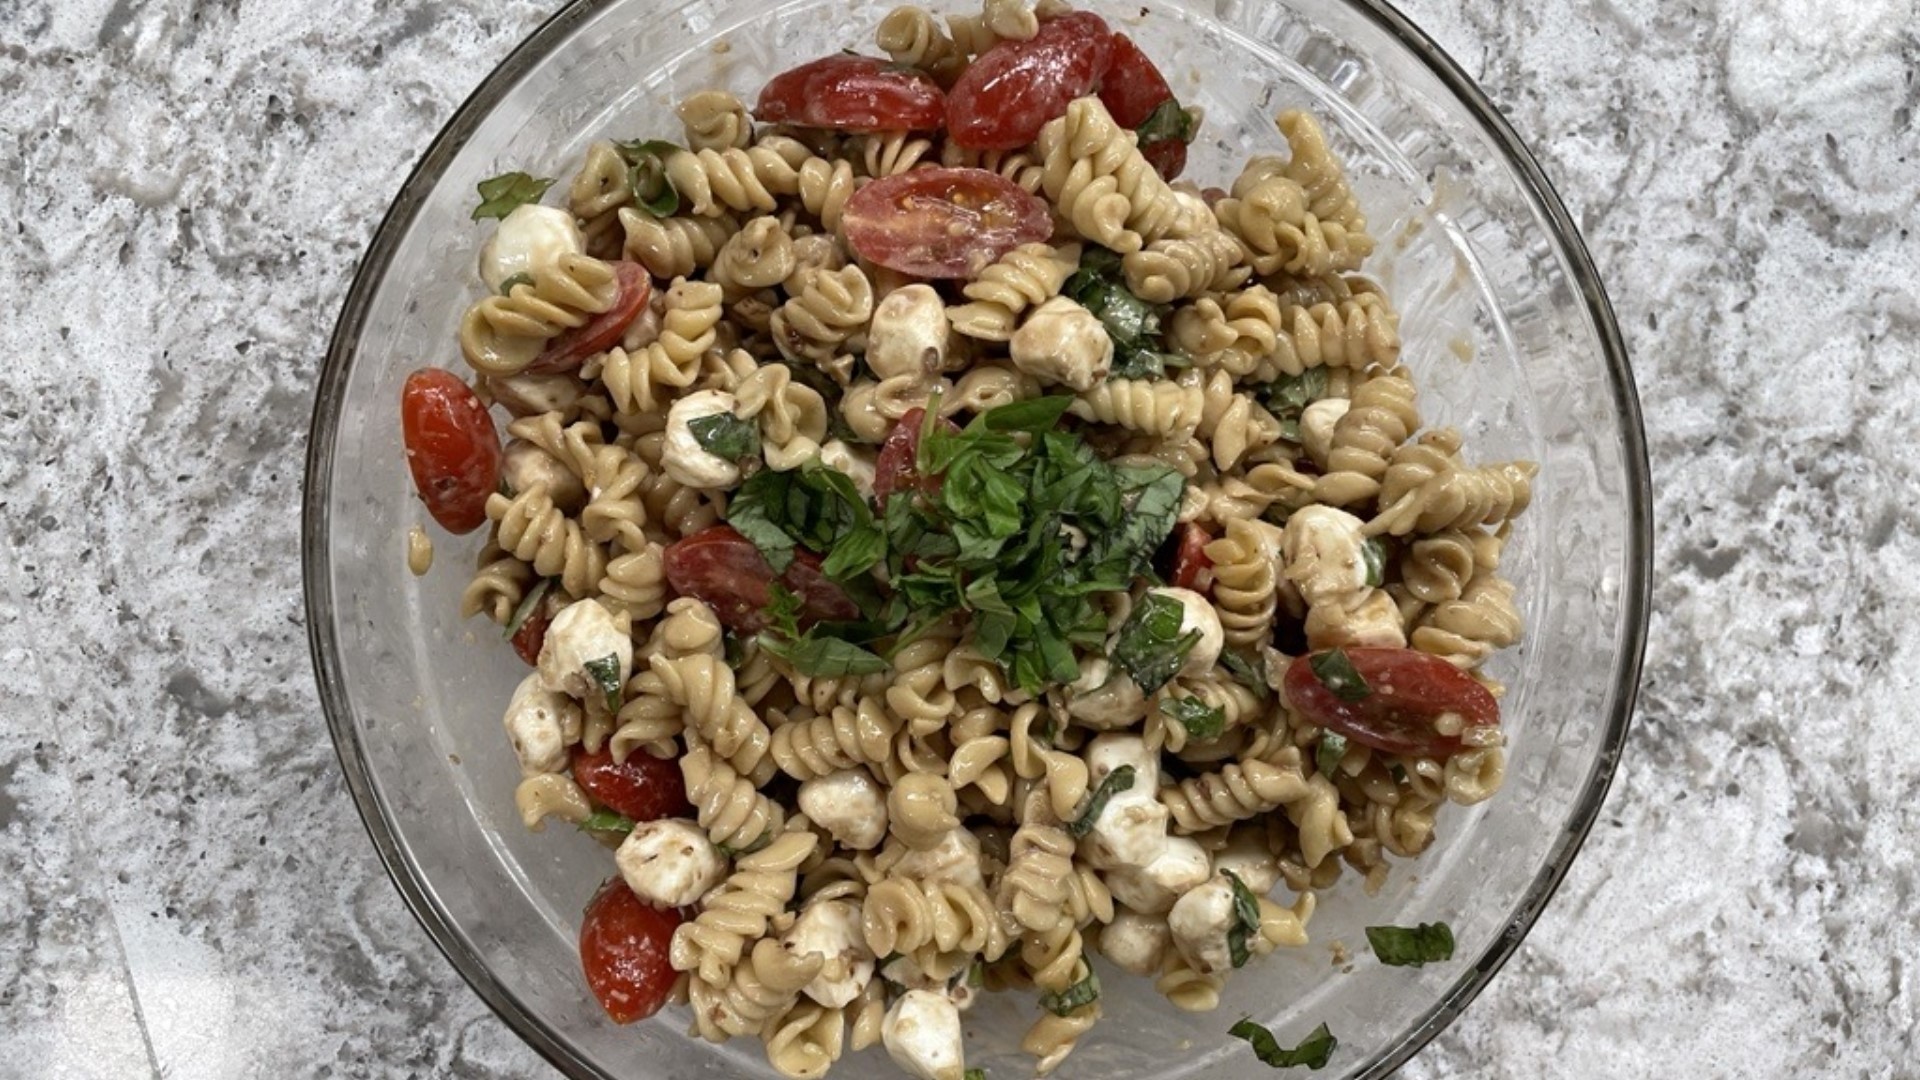 Perfect for picnics, holidays or muggy summer nights, this pasta salad brings the best of Italian flavors straight to your table and can be enjoyed all week long!